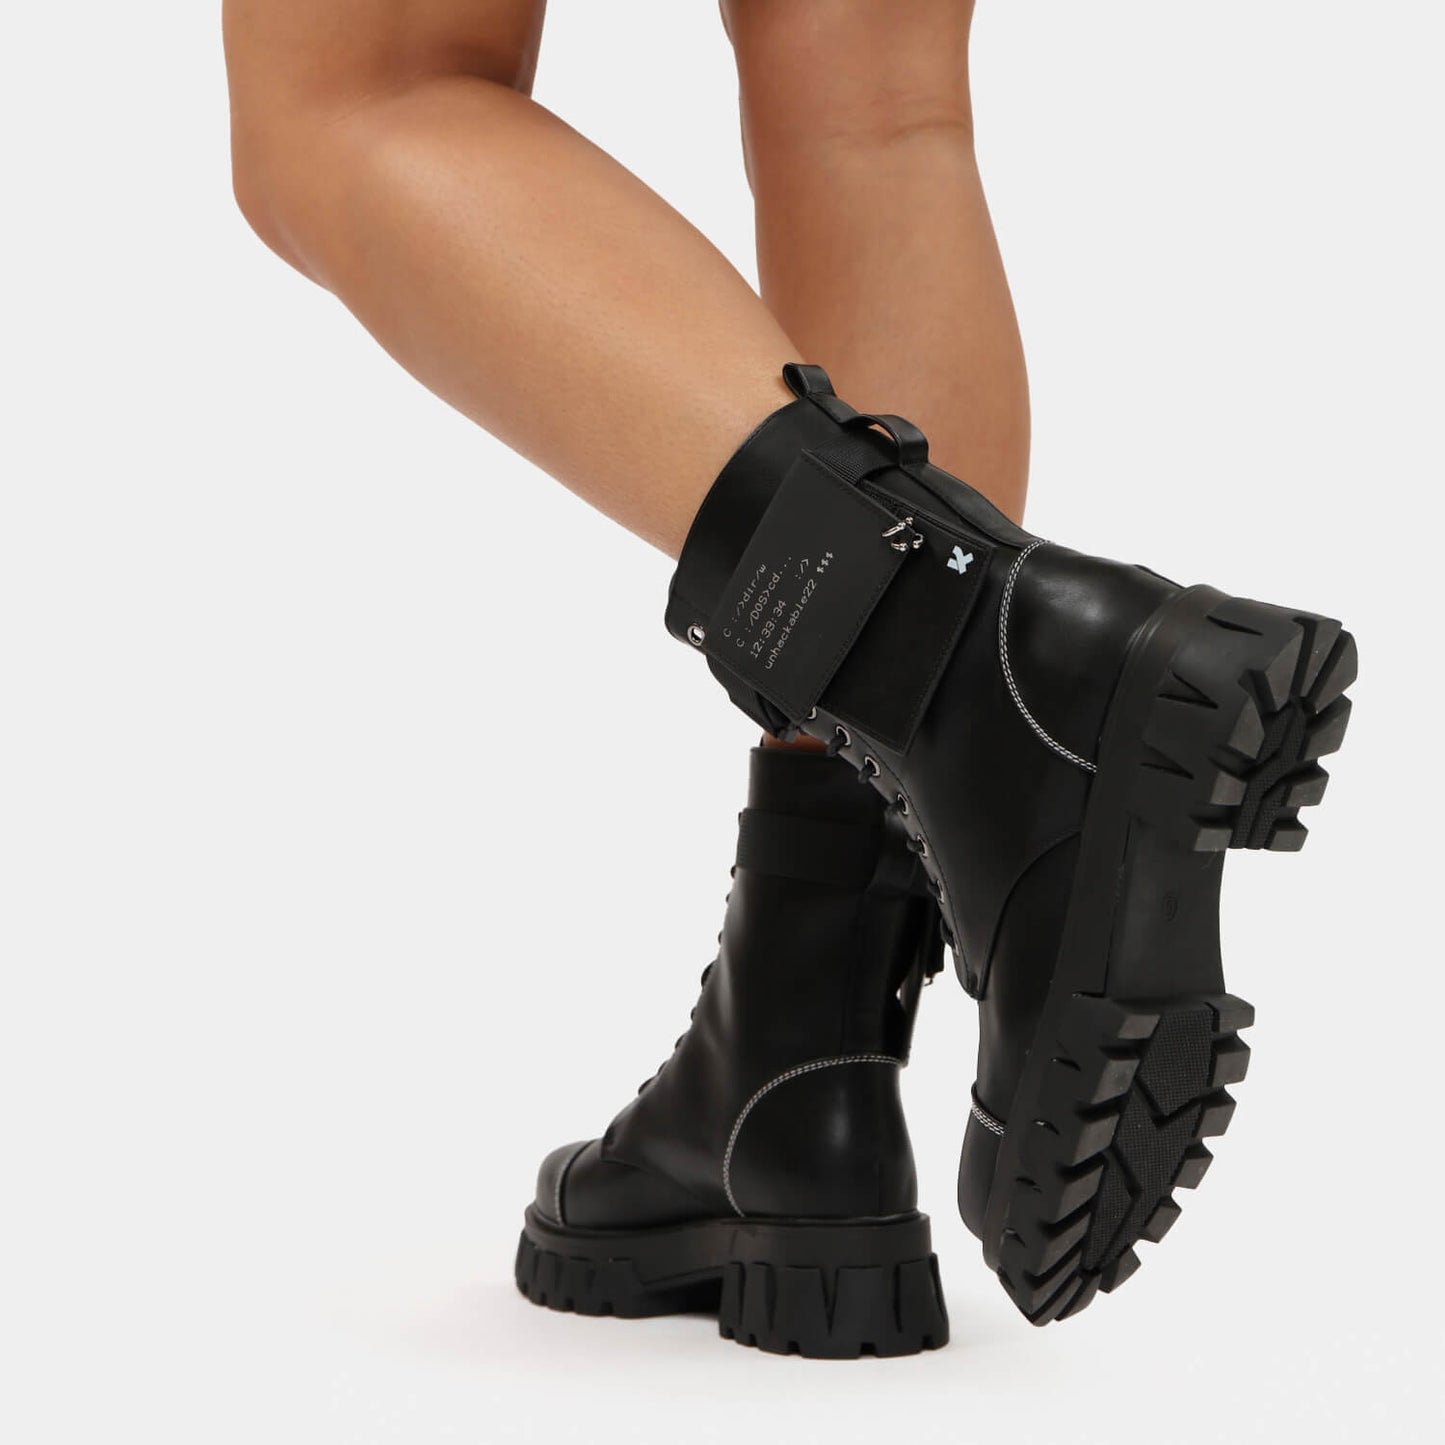 Banshee Fallout Cyber Boots - Ankle Boots - KOI Footwear - Black - Model Sole View